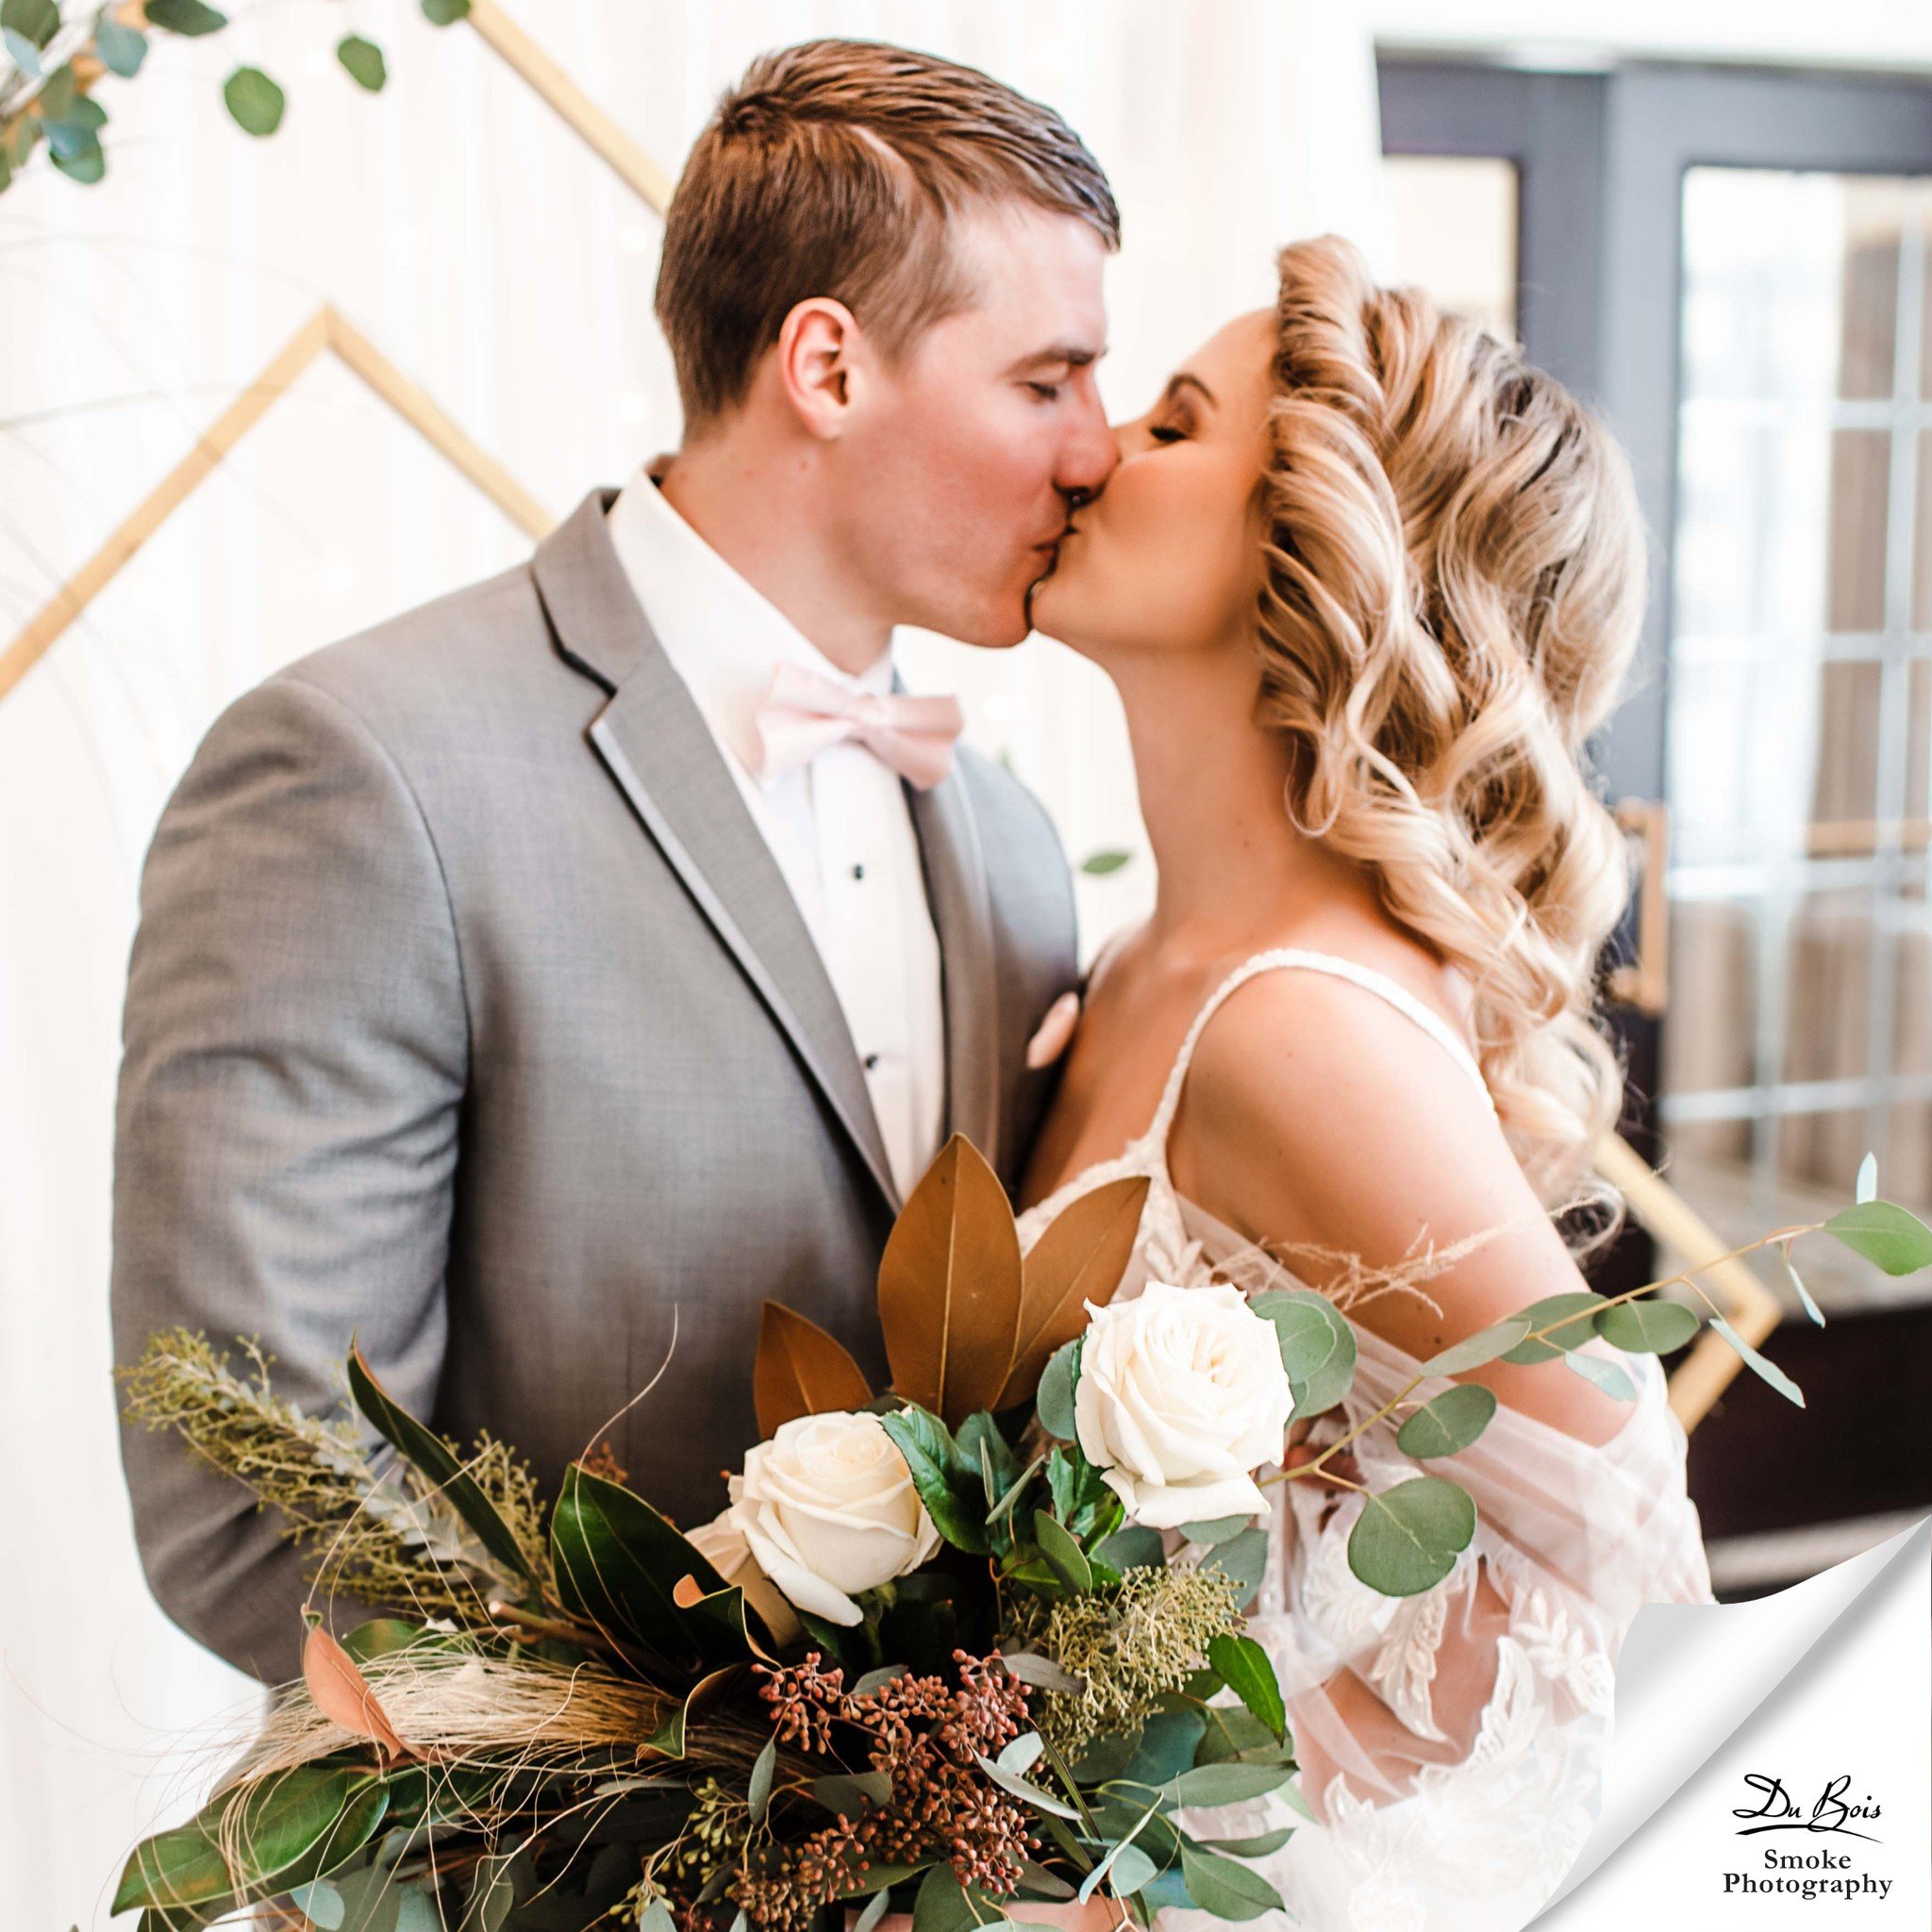 🎩✨ A match made in wedding heaven! Our gray ensemble provided a harmonious blend of earthy tones and modern elegance for this wedding. Shoutout to @smokephotography_ for capturing this picturesque couple!

Looking for gray suits or tuxes for your we